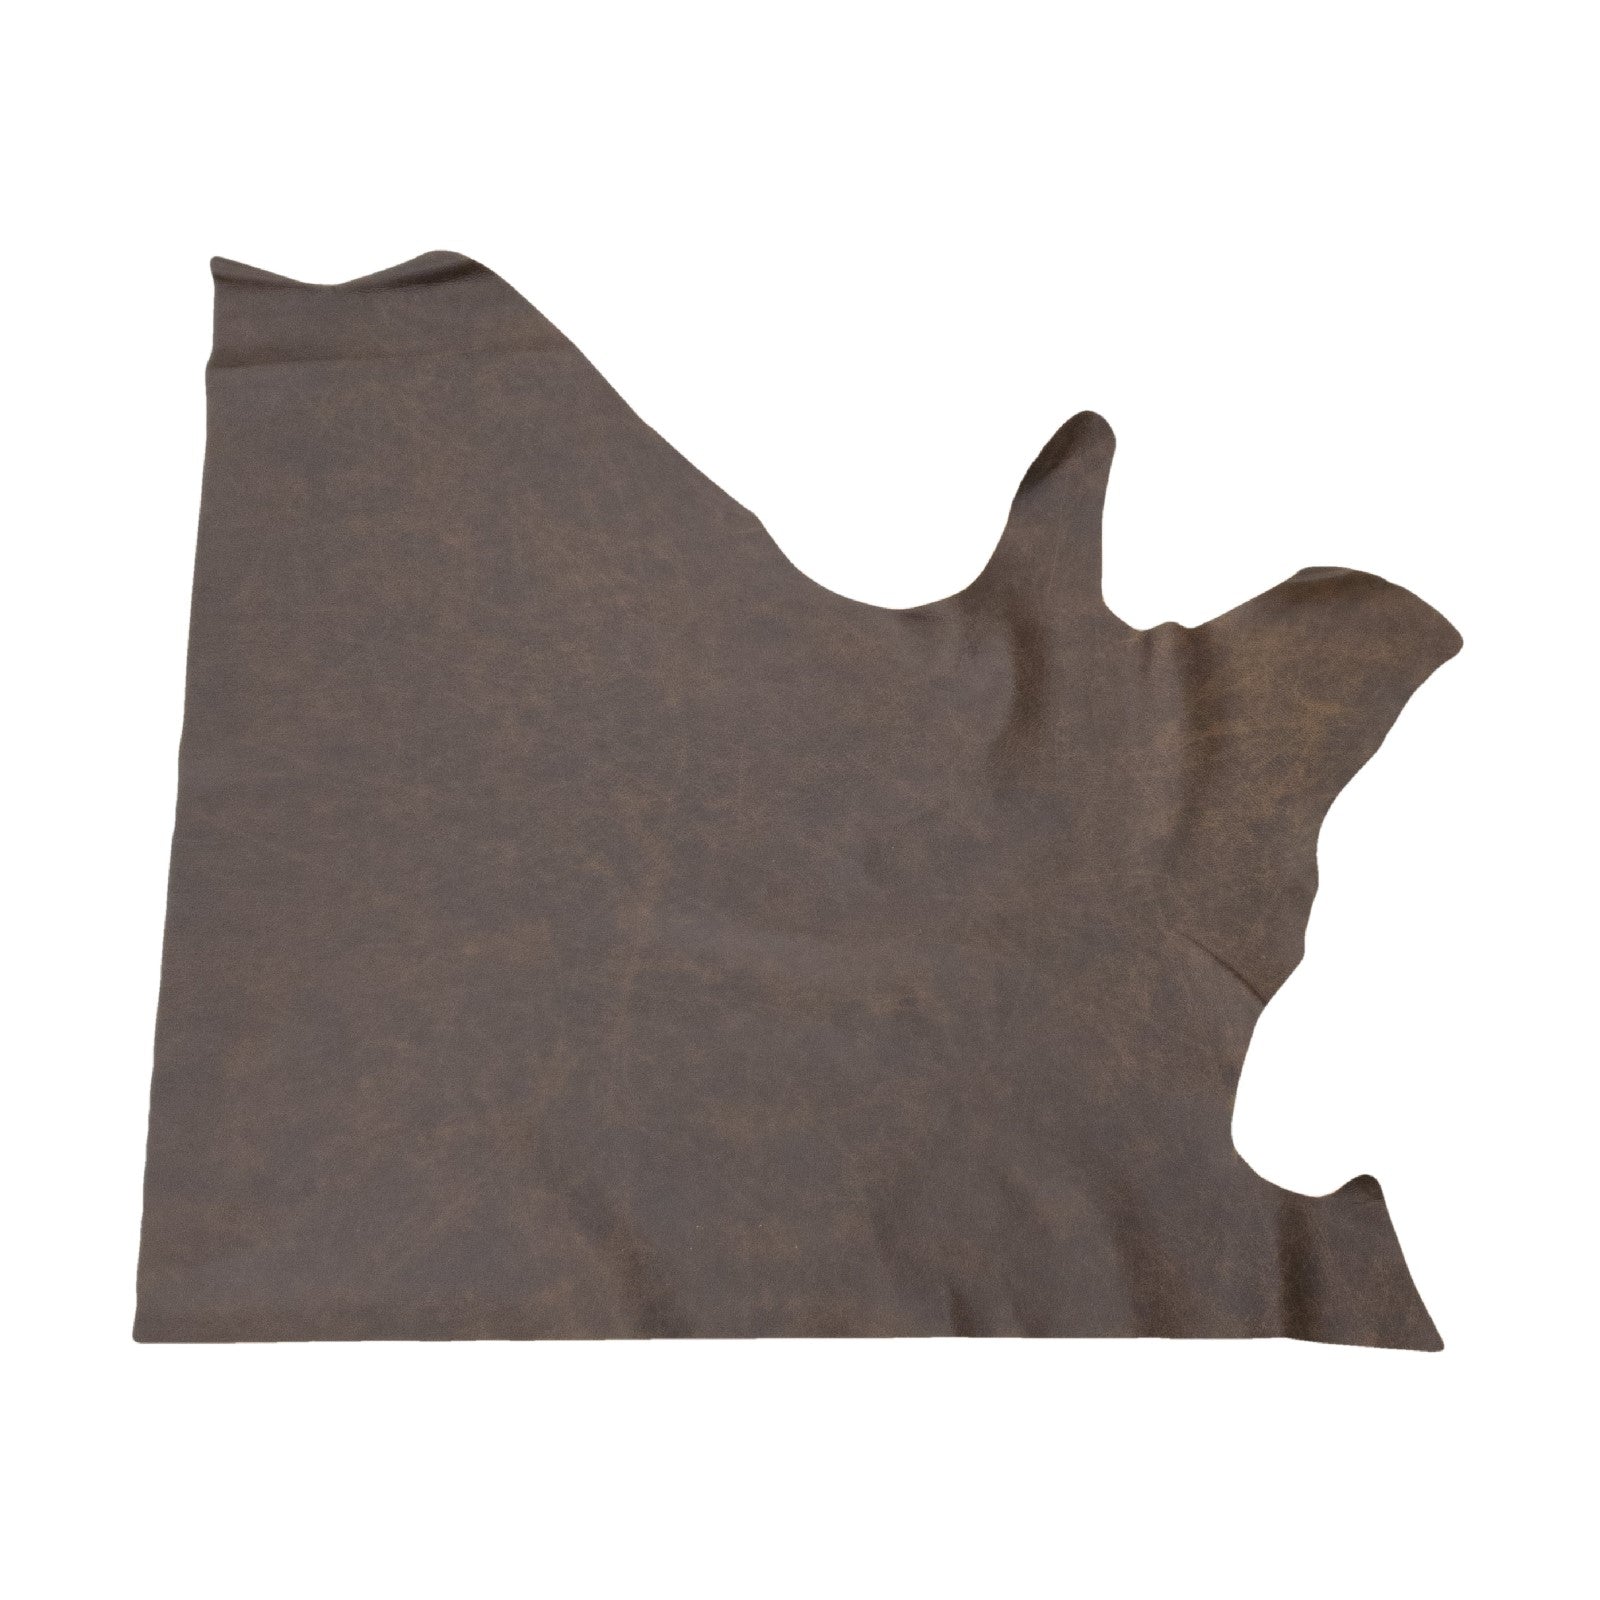 B-52 Brown, 2-3 oz Cow Hides, Vintage Bomber Browns, Top Piece / 5.5-6.5 | The Leather Guy